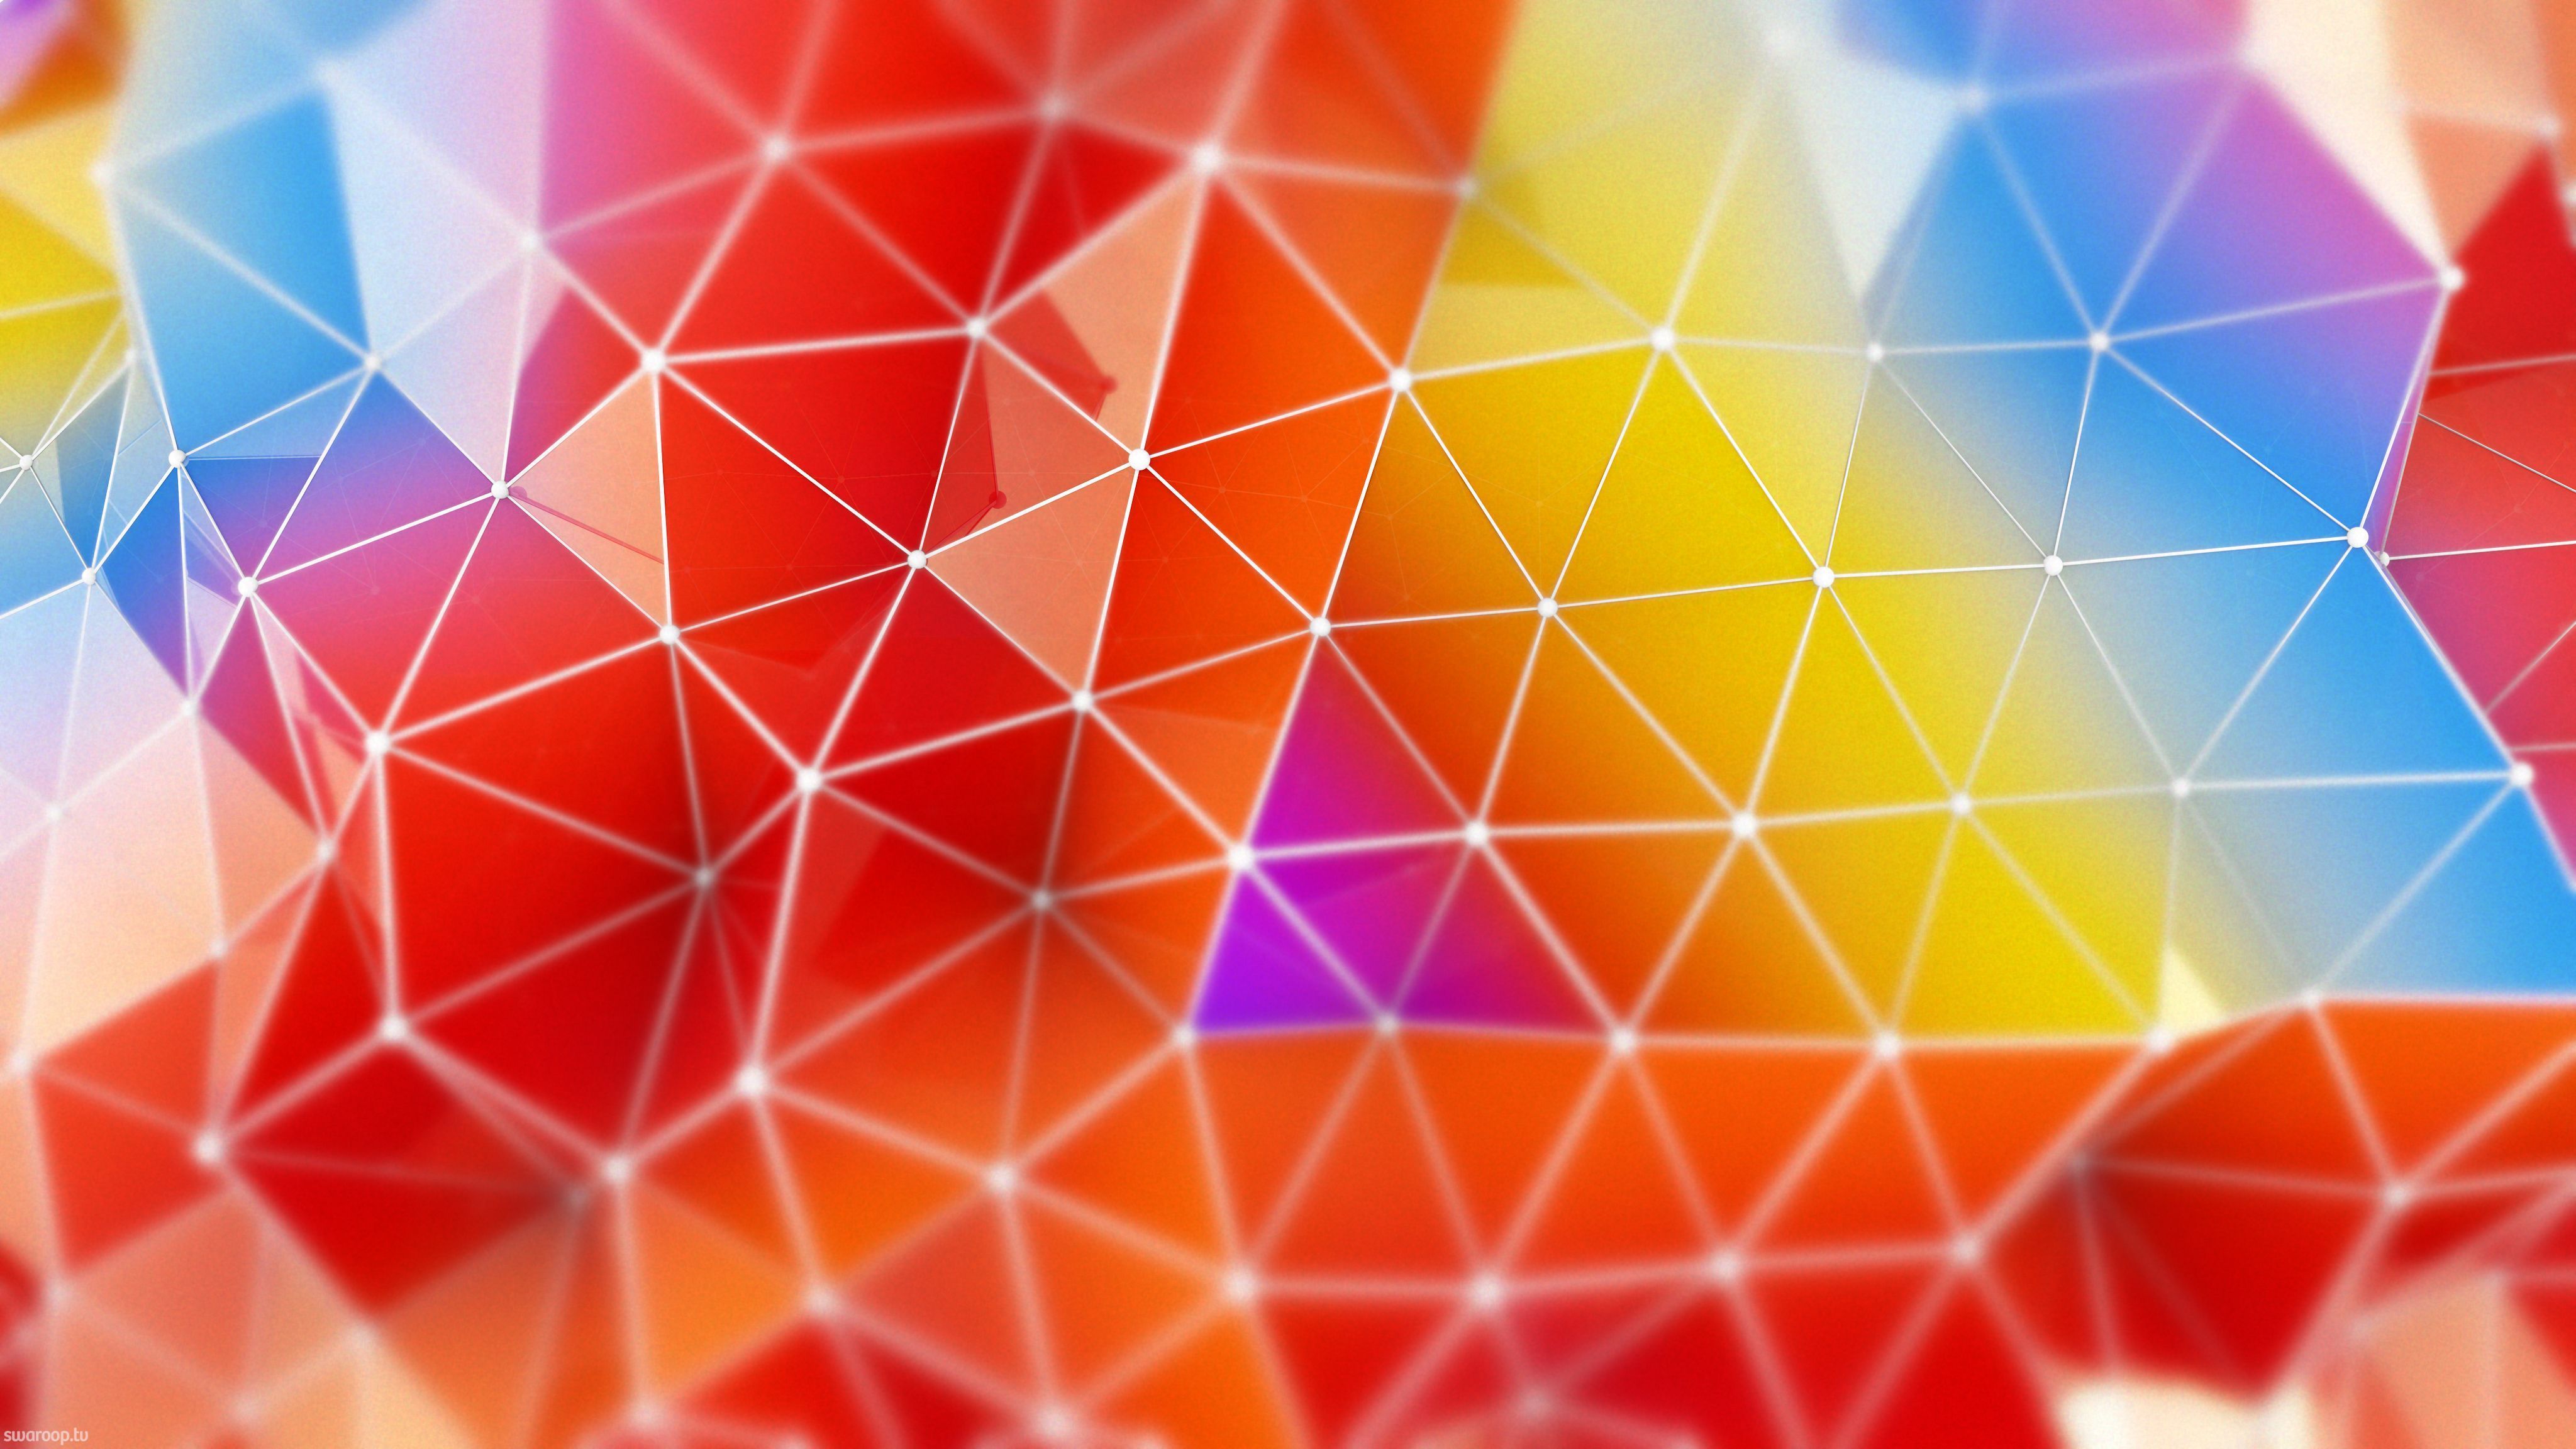 4k Wallpaper Abstract For Mobile